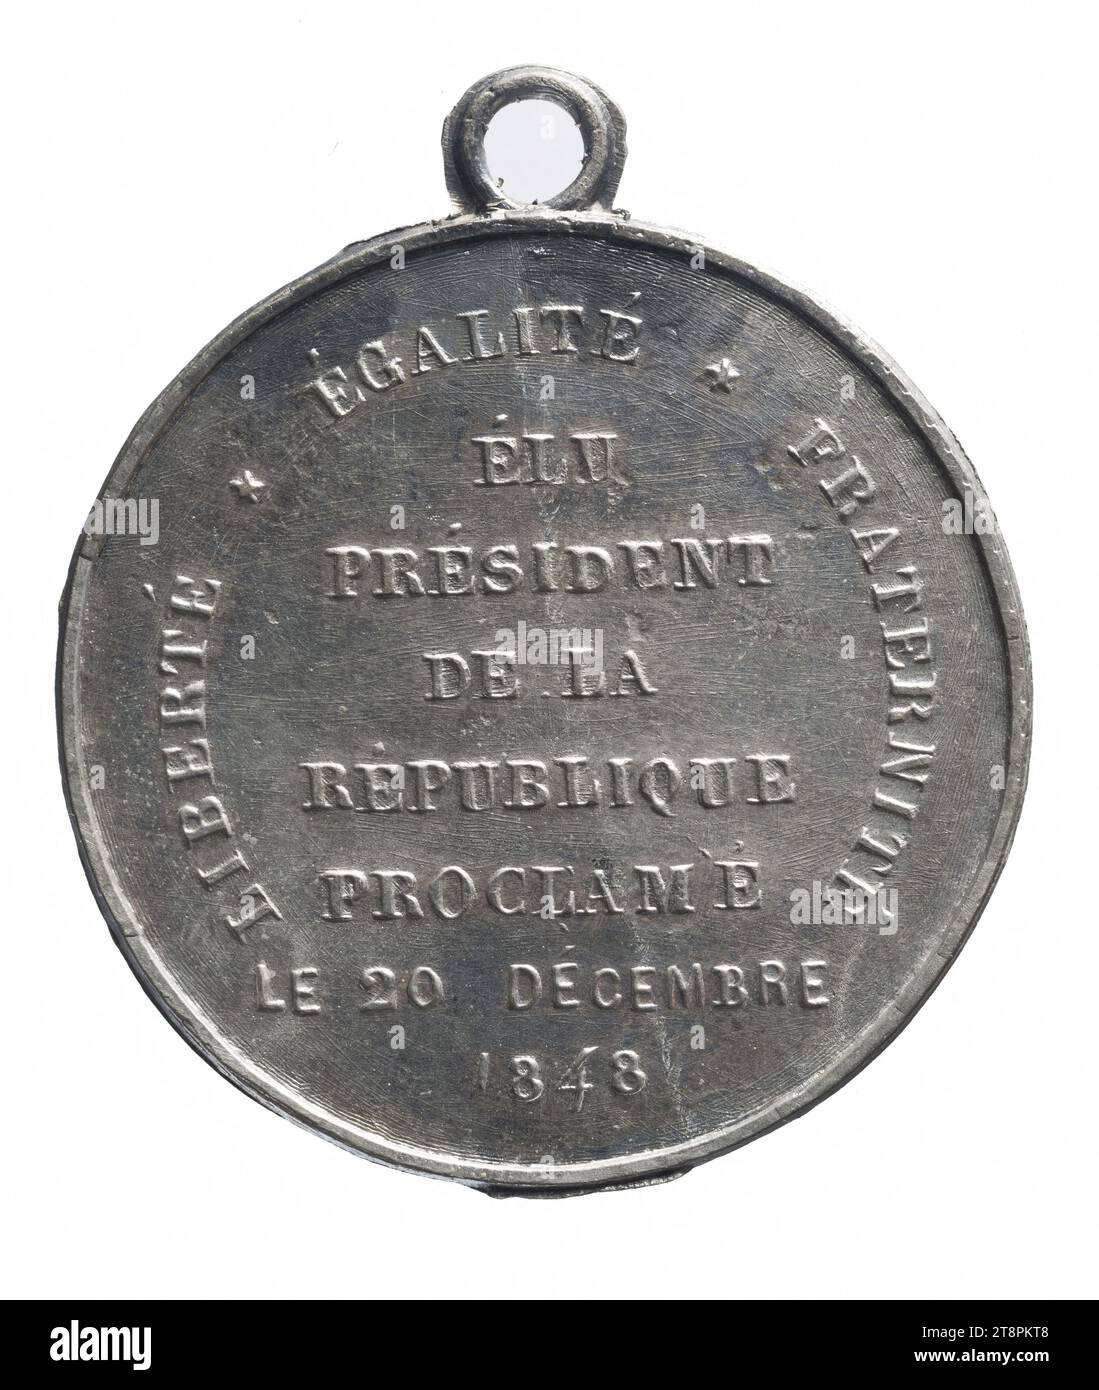 Louis-Napoléon Bonaparte proclaimed President of the French Republic, December 20, 1848, In 1848, Numismatic, Medal, Alloy, Dimensions - Work: Diameter: 3.6 cm, Weight (type size): 7.27 g Stock Photo